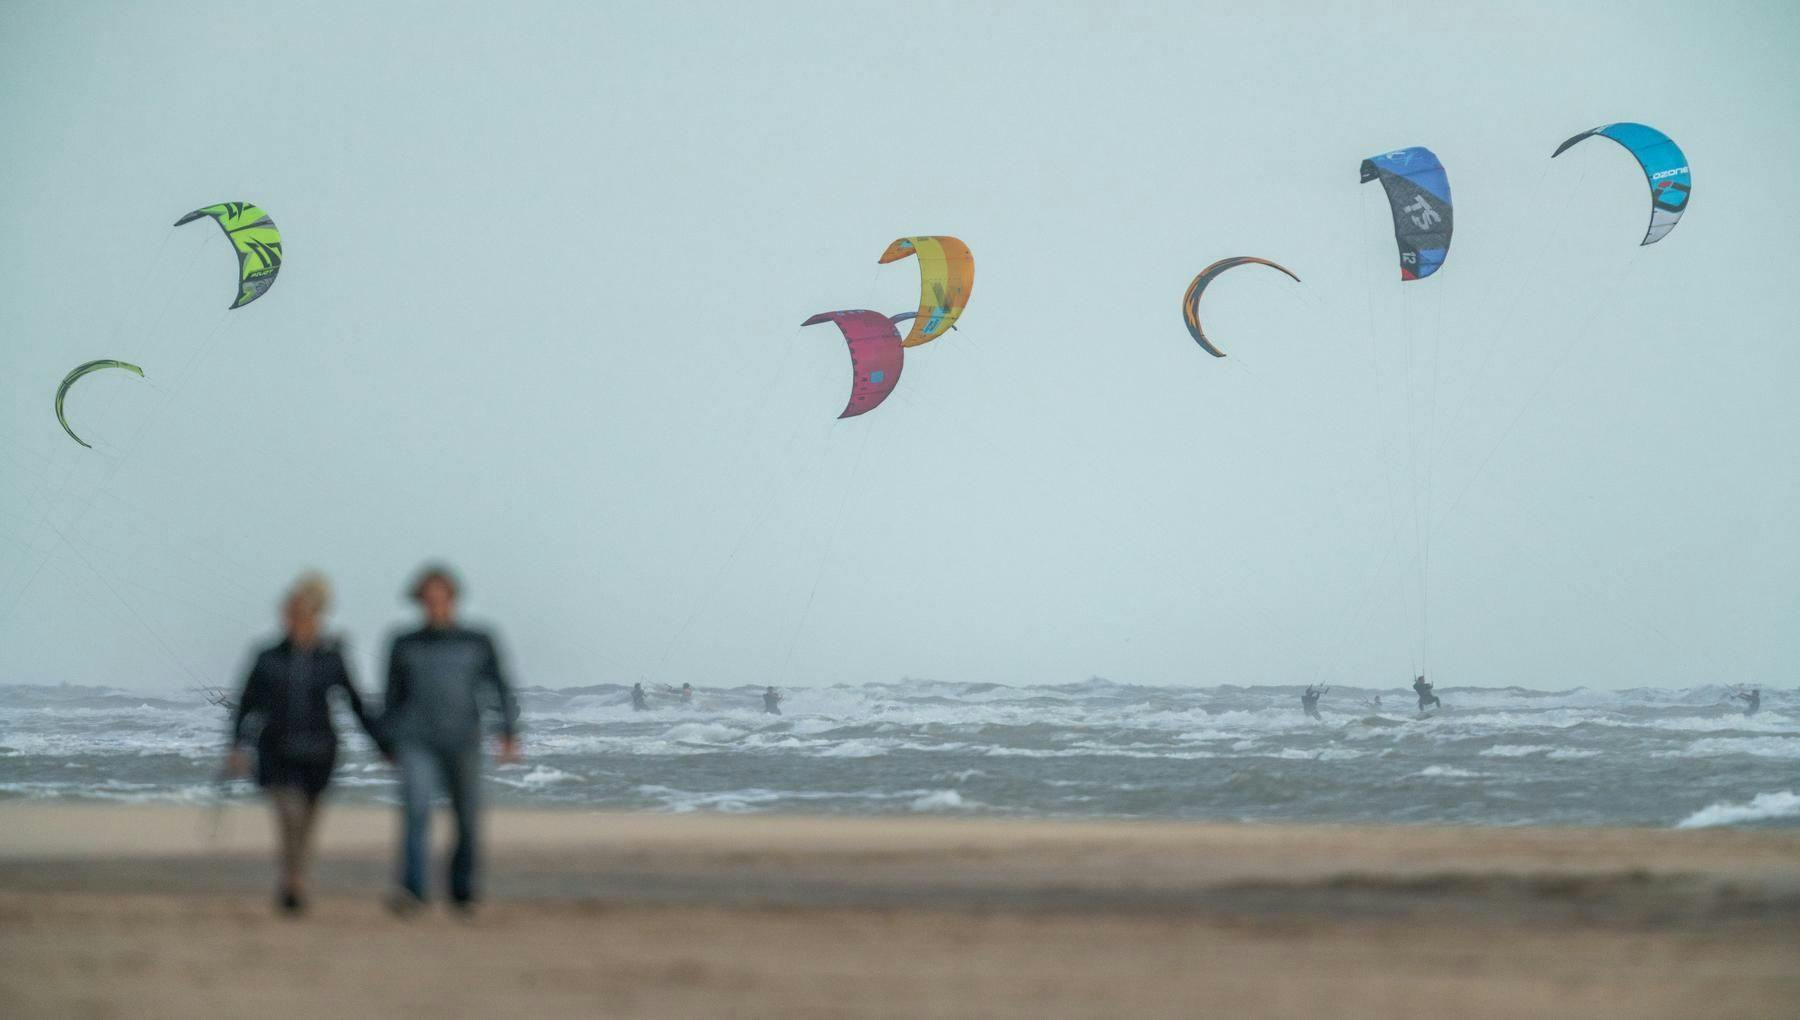 Couple walking over Amsterdam beach / On background kite surfers in action